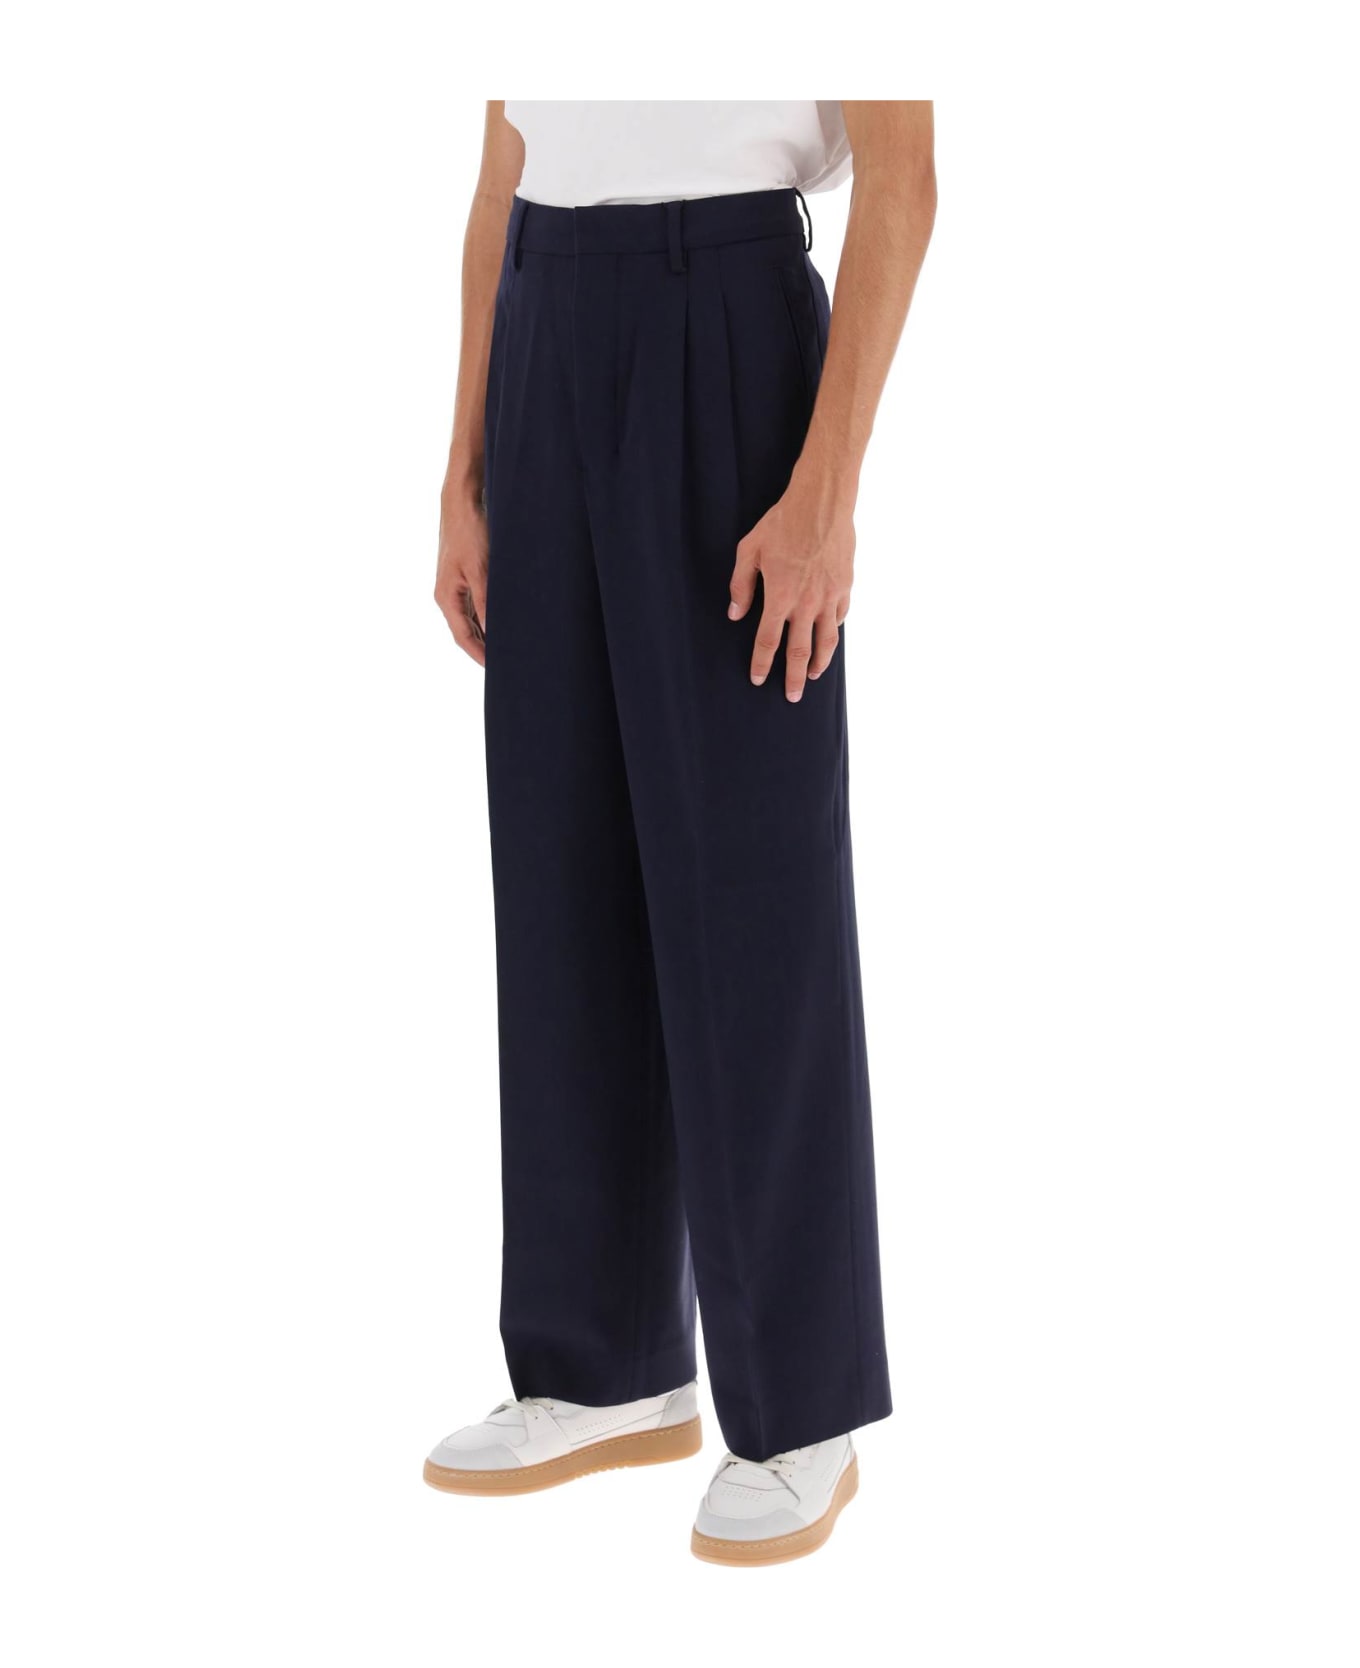 Ami Alexandre Mattiussi Loose Fit Pants With Straight Cut - NIGHT BLUE (Blue)